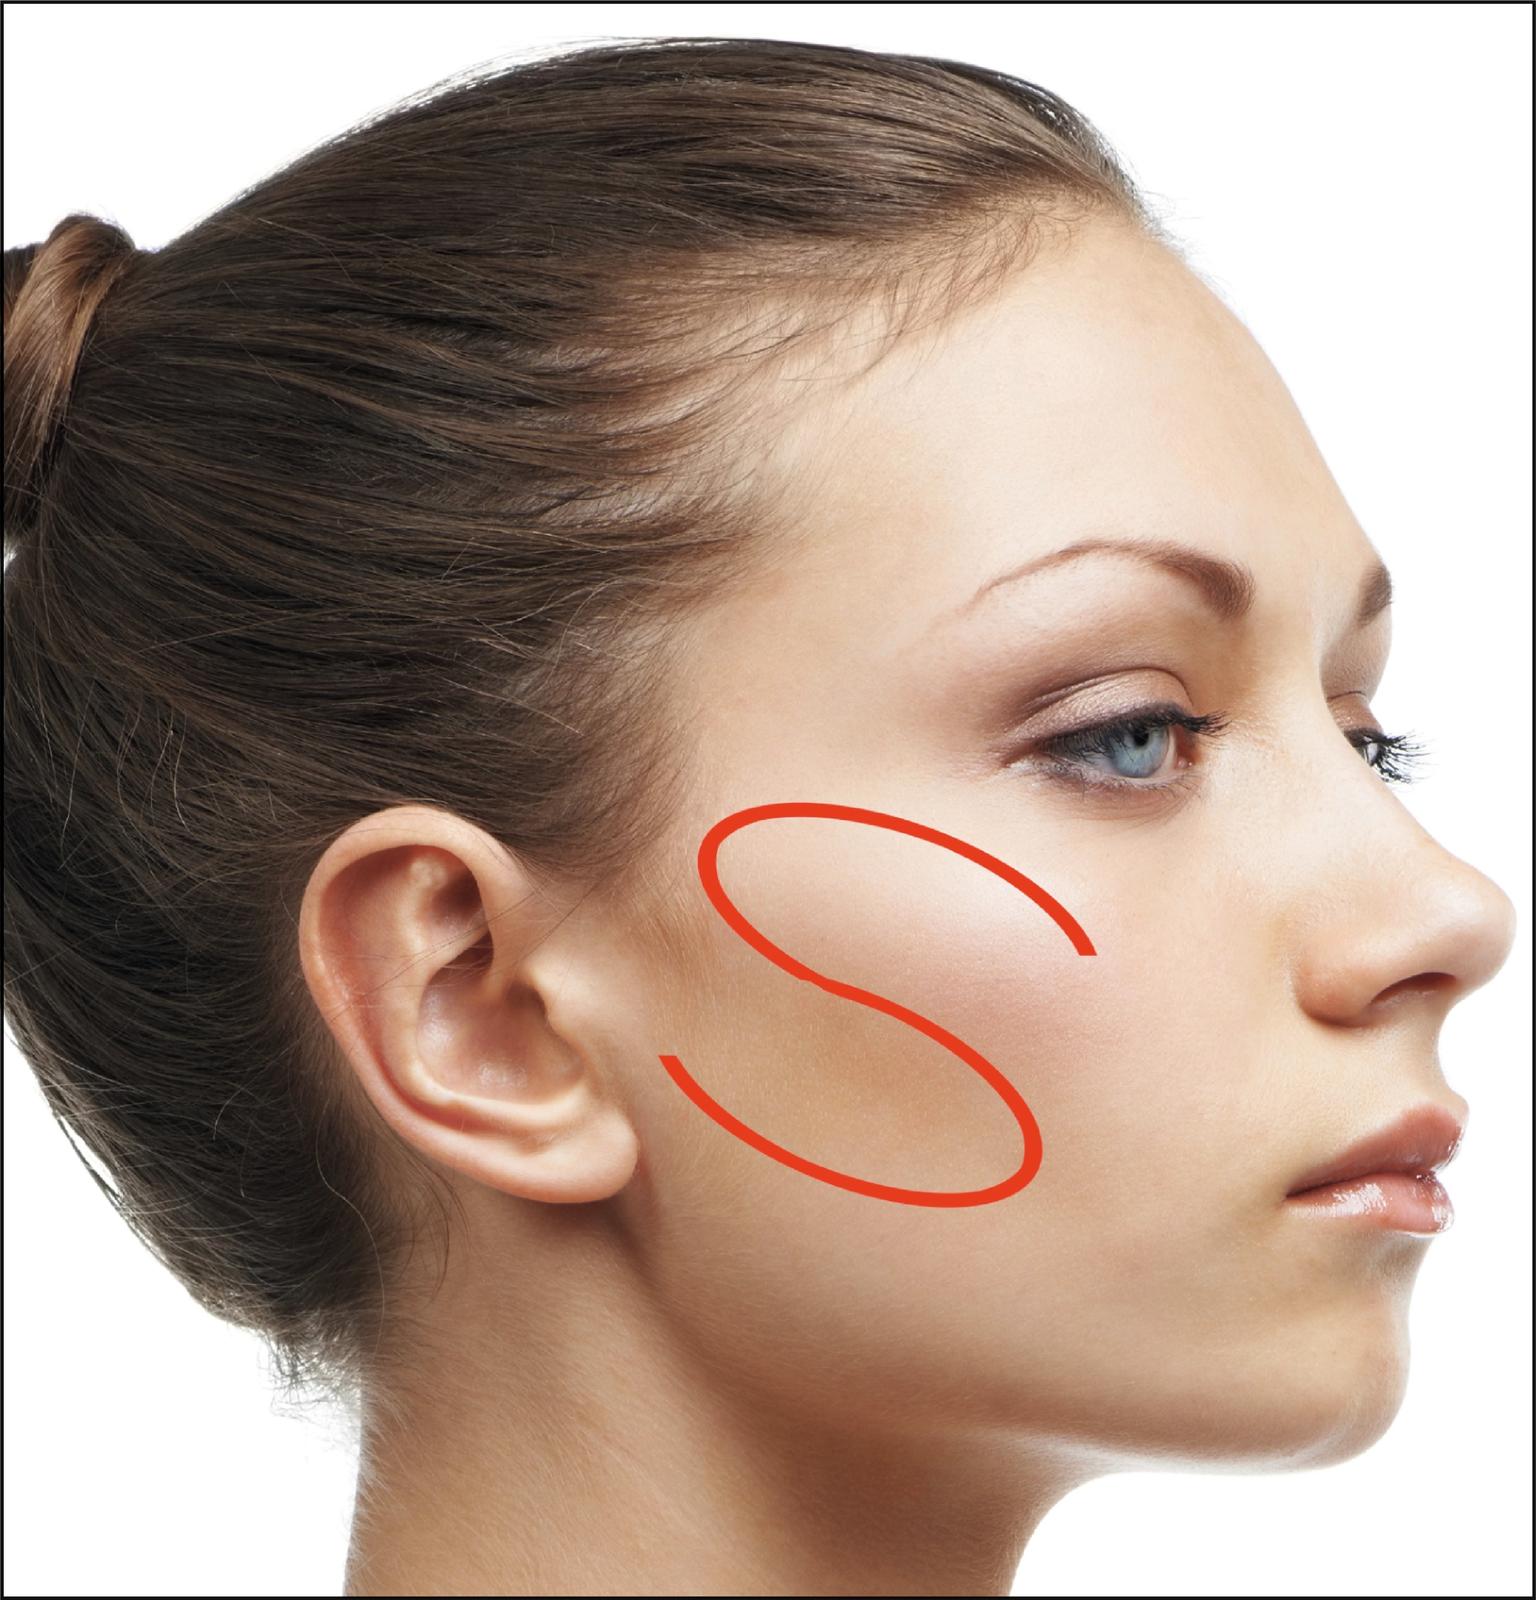 Fig. 3.2, Diagram of the ogee curve taking in the eyelid–cheek junction, high cheek bone, and the concavity inferior to this.